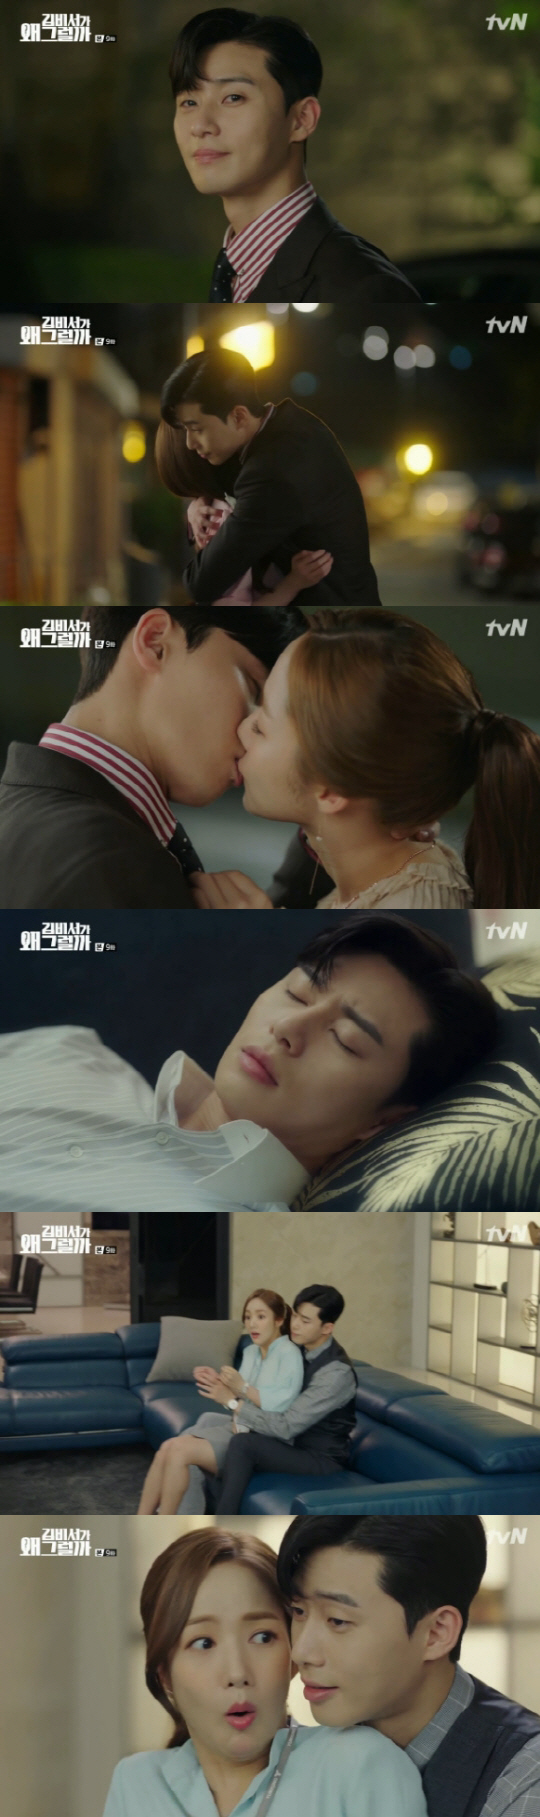 Park Seo-joon has become a Park Min-young A loved one.Park Seo-joon made up with a kiss when he did his own Rainer job for Park Min-young.In the ninth episode of Why Will Kim Rainer Do It, Lee Yeongjun (Park Seo-joon) confirmed each others hearts through kisses by Kim Mi-so.Lee Yeongjun asked, Id better make sure - were going to clean up, right?Kim Mi-so replied, Yes, and Lee Yeongjun said, I think its a quiz program MC. What is so hard?As Kim Mi-so walked quickly, she quipped, Come on, lets go, my girl!Lee Yeongjun then says, I dont want to break up, I have great ability and appearance, so come and marry me.Kim Mi-so said, I have only been dating for an hour, but it looks like a proposal. It is too hasty.Kim Mi-so, who came to work the next day, looked at Lee Yeongjun who was asleep on the sofa and covered the blanket, but suddenly Lee Yeongjun woke up and took Kim Mi-sos hand.Lee Yeongjun put Kim Mi-so on his lap.Lee Yeongjun said, If you wake up Blow-Up who has fallen asleep, you should take this. I am sorry, I will not control the speed of running now.Kim Mi-so is surprised to say, Blow-Up is how to say that. But I do not think it hurts anywhere, but I think you are sleeping a lot nowadays.Lee Yeongjun grins, saying, Do not worry.In addition, Lee Yeongjun did his own things to the smile of Kim Rainer when he was usually given a break to his lover smile.In response, the staff of the affiliated room, who Rainlotted the head of the politician (Lee Yu-jun) and the head of the Bongsera (Hwang Bo-ra), were astonished as if they had seen ghosts.Lee Yeongjun tried to reveal the aspect of A loved one without knowing others, but the employees who wondered about it continued.After all, Kim Mi-so tells Lee Yeongjun, Its what Ive been doing for nine years so please let me do it in the future.Lee Yeongjun said, I know what you mean, Kim Rain, but I just dont want to do that to Kim Rain.Kim Mi-so said, I felt Pride when I saw my boss who was satisfied with such a thing, but I think that what you just said is not respected.Lee Yeongjun said, I am sad. Do you think it would have been easy to support someone? I wanted to be good to Kim Rain.Kim Mi-so said, But dont do that in the future. This is where you work, this is your work hours. You have to draw the lines between Kim Rain and Kim Mi-so.Please understand, he said, leaving the vice chairmans office.Lee Yeongjun, who is left alone, says, Kim Rain is too rational, he says to himself, Why do you feel like it is all right?Two people in conflict for the first time since becoming a couple: Lee Yeongjun, after agonizing, packs up Kim Mi-sos favorite shells and pupa and goes home.My girlfriends taste is unique. So Kim Mi-so thanks me for coming. I missed you so much.Lee Yeongjun asked, Why is it rational in the company? Kim Mi-so said, I tried to draw a line more than usual because I was a company.I am sorry for making you sad, and Lee Yeongjun smiled as if satisfied.But suddenly Lee Yeongjun asked, I dont like the title, I call you brother, Ill call you smile, and Kim Mi-so poured out his drink.In the end, Kim Mi-so promises to name his brother the following.At this point, the sisters of the smile rang the doorbell, and Kim Mi-so hides Lee Yeongjun in the closet.The sisters, who didnt know there was Lee Yeongjun in the closet, excited his back-to-back conversation.After sending his sisters, Kim Mi-so hurriedly opened his closet. Waiting for him was an angry Lee Yeongjun.He said, I did not talk about a date on the blockbuster scale, but I just ate it. And was I selfish? Would I have bought pig shells and insects?But Lee Yeongjun seemed to fall in love properly; he soon said, What if I fight this? Ive managed to reconcile.I can not get angry because I am so pretty. The two of them kissed the reconciliation in the closet.Kim Mi-so also meets Lee Sung-yeon (Lee Tae-hwan) with Lee Yeongjuns permission.Lee Sung-yeon said, I am sorry that I was Confessions at that time. Kim Mi-so draws a line saying, I did not meet my brother with the heart of reason.Then Lee Sung-yeon asked, Is it because of Lee Yeongjun?Lee Yeongjun appears at this time and If you say this in front of a smile again, I will not look at your family at that time. Lets go.Meanwhile, Kim Mi-so had an opportunity to be sure that his brother was Lee Yeongjun, who he was looking for, and so far Kim Mi-so has known that his brother was Lee Sung-yeon (Lee Tae-hwan).However, Kim Mi-so has doubts about Lee Sung-yeons ankle and cold side without scarring.In addition, the details Choi had mentioned were consistent with what Lee Yeongjun had mentioned, and it reminds me that his brothers name, which he had called as a child, was Lee Sung-hyun, not Lee Sung-yeon.So Kim Mi-so asked Lee Yeongjun, Sung Hyun Brother? While he was asleep in the car for a while. Lee Yeongjun is surprised to open his eyes Why.